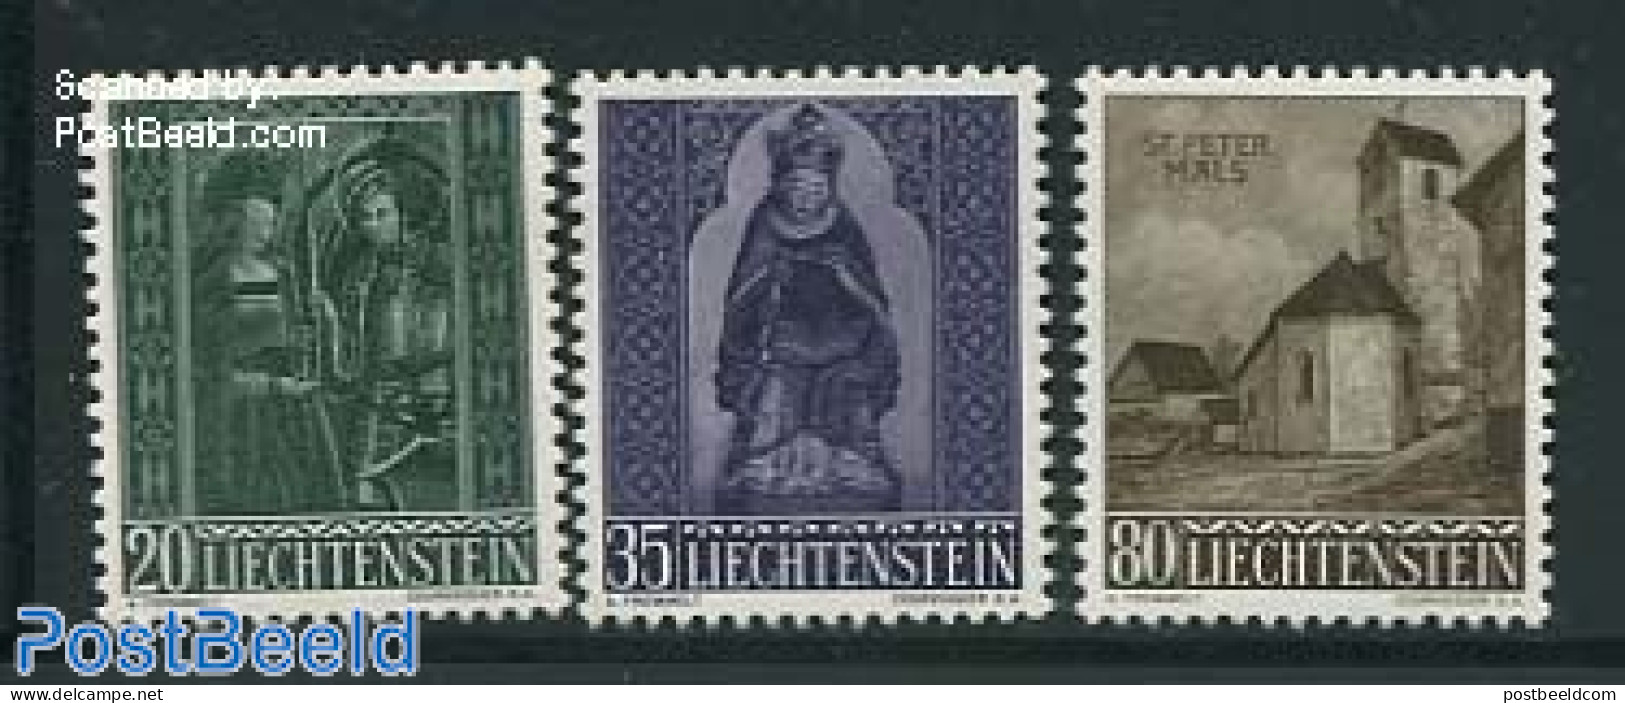 Liechtenstein 1958 Christmas 3v, Mint NH, Religion - Christmas - Churches, Temples, Mosques, Synagogues - Ungebraucht